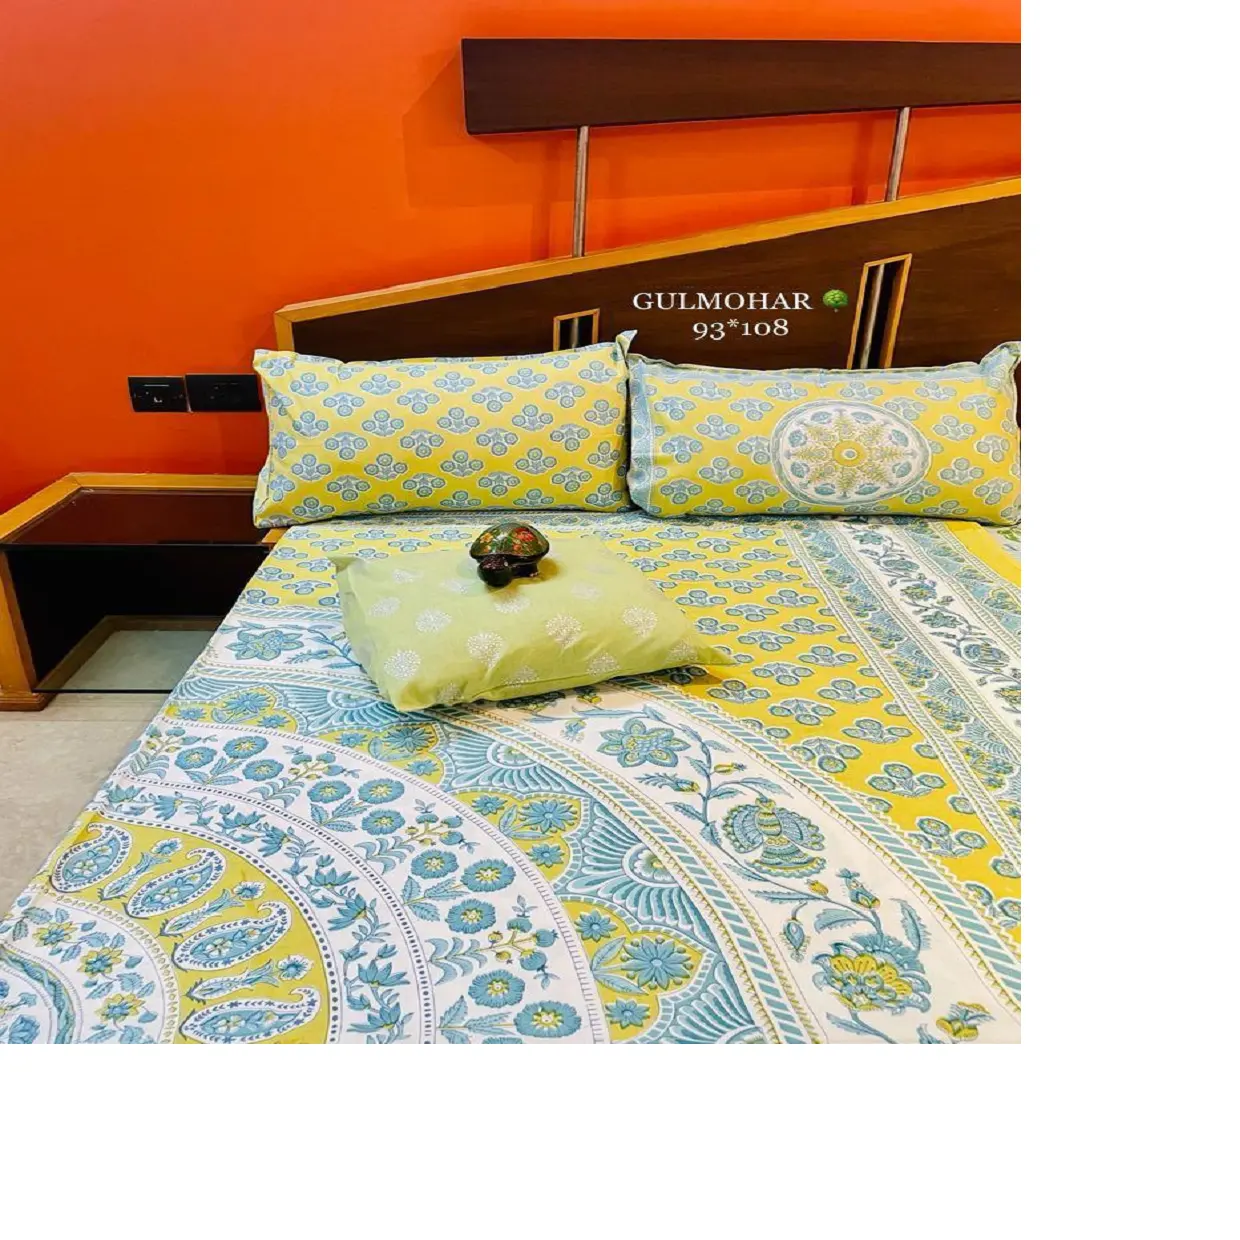 custom made yellow coloured printed 100% cotton bedsheets in different designs & various sizes in geometrical designs